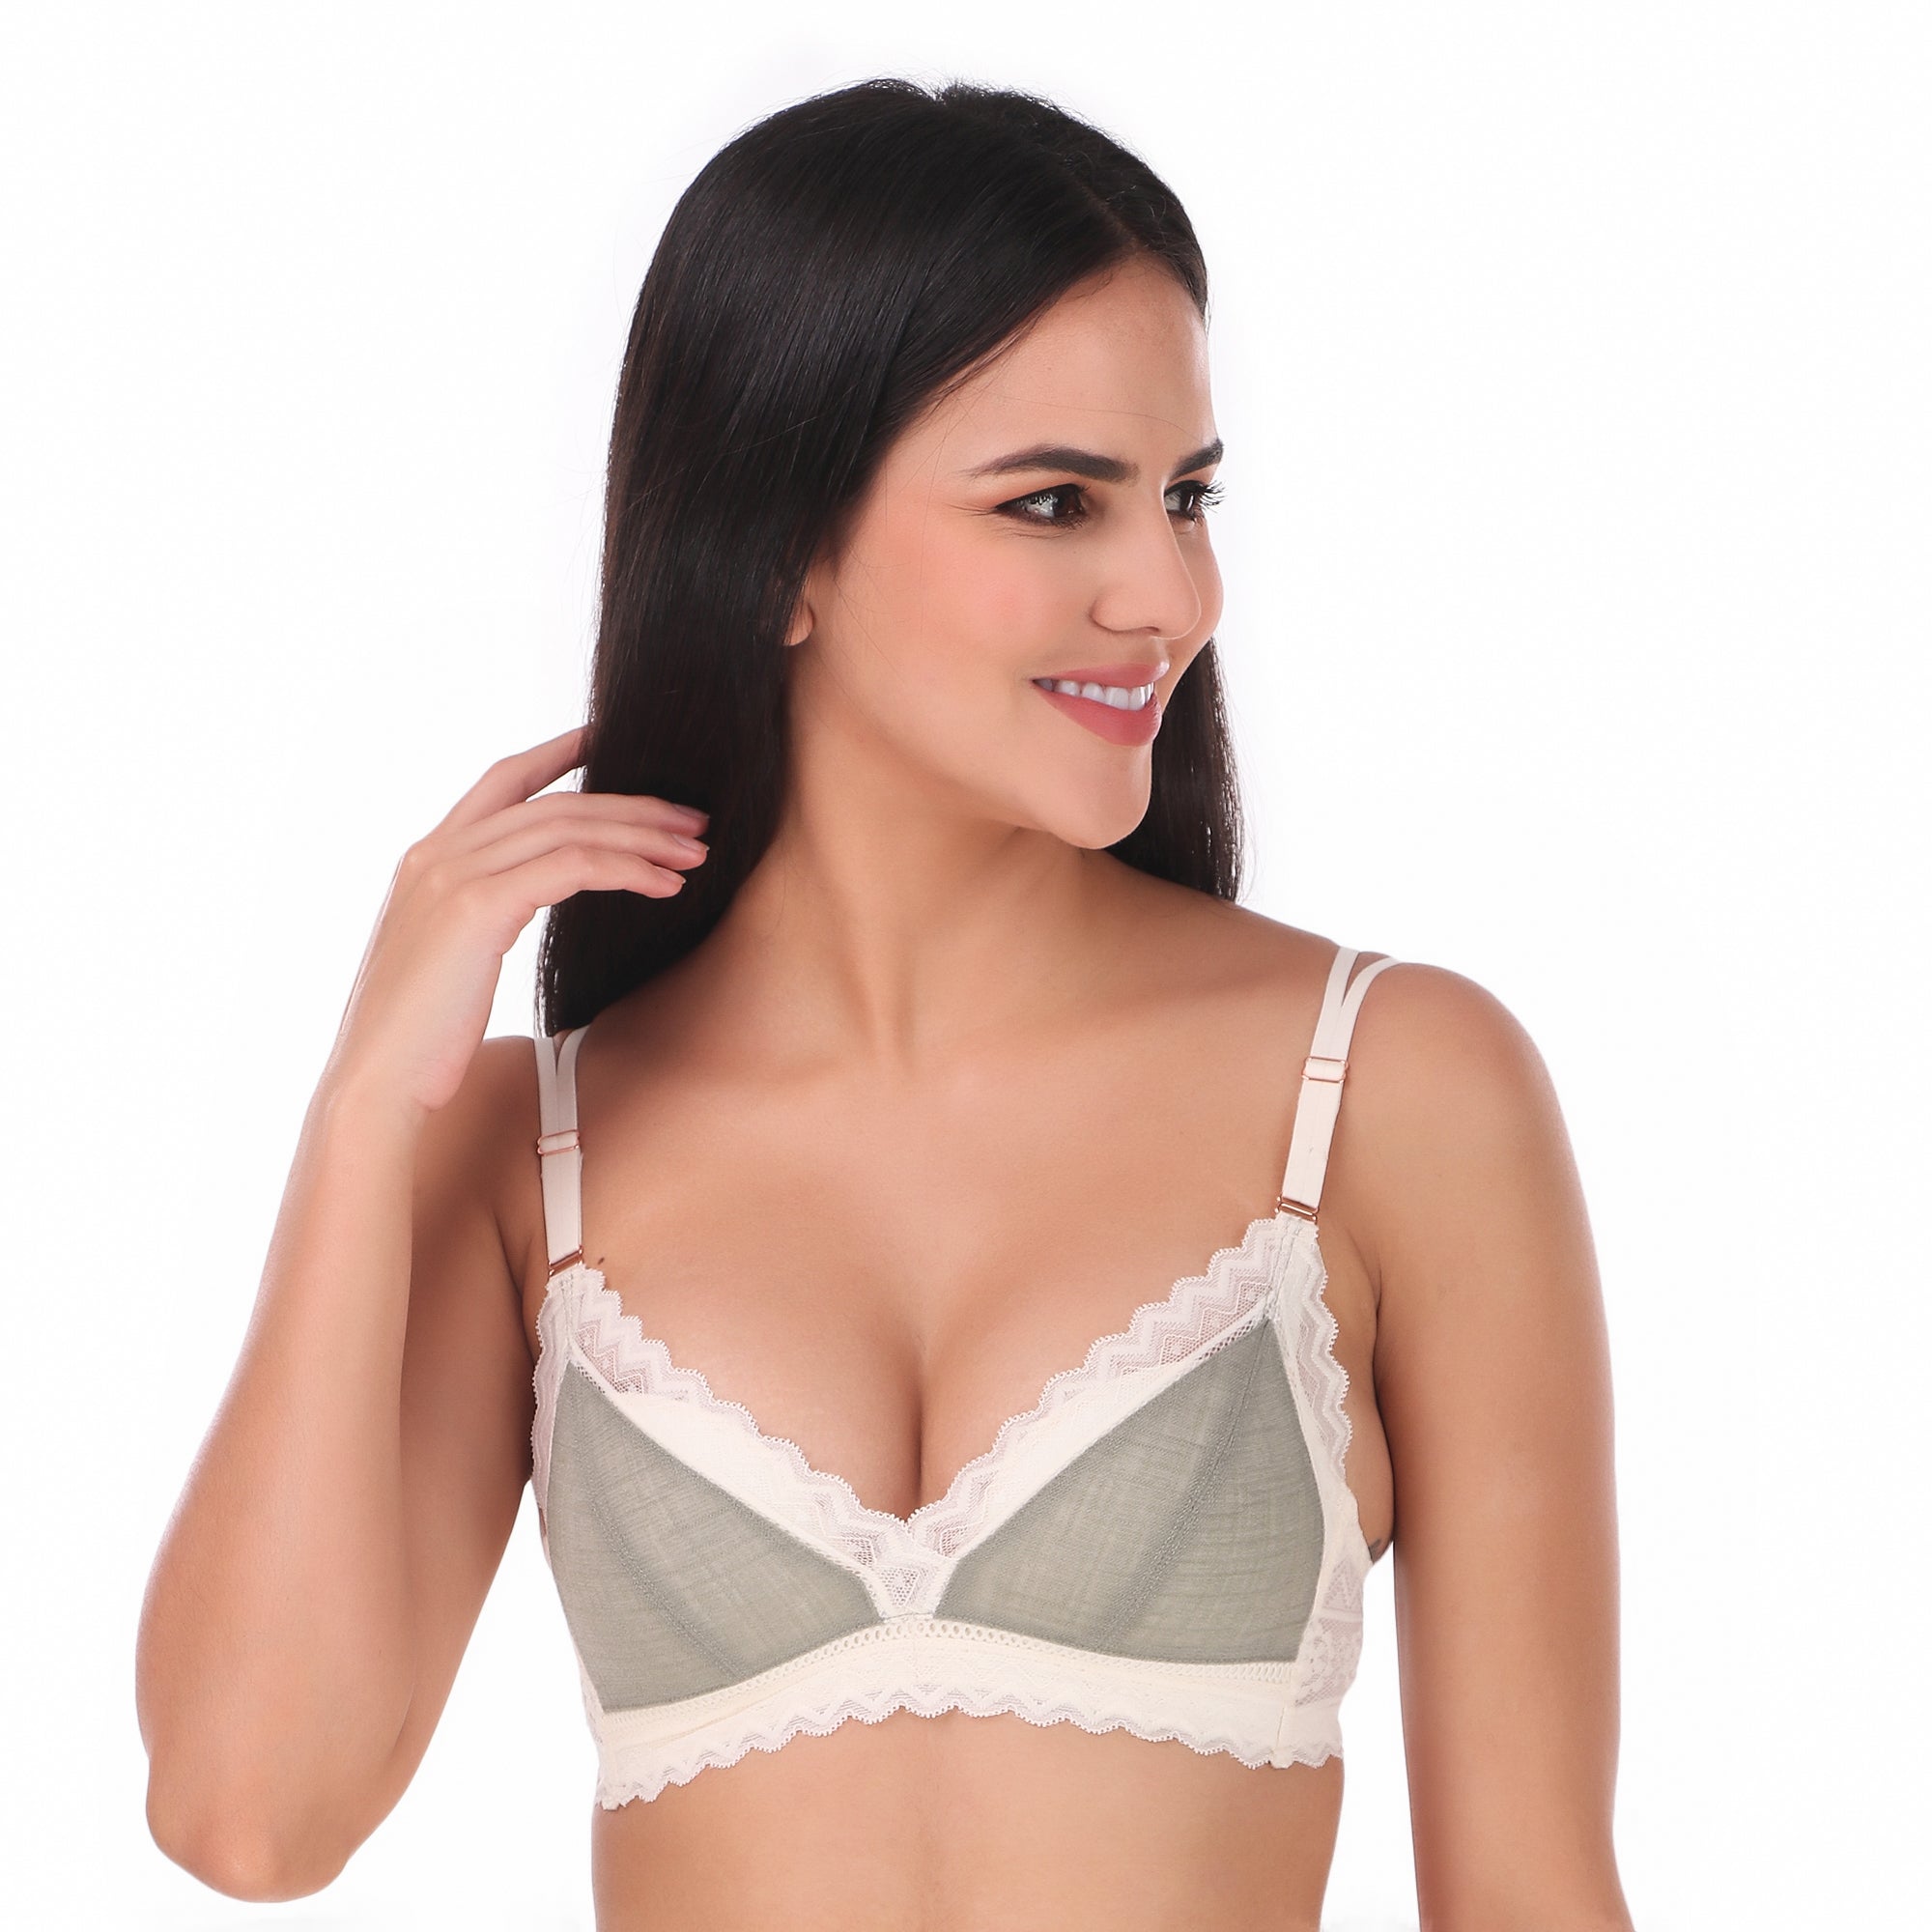 Kddylitq Mastectomy Bras With Built In Breast Forms Wireless Placed  Lingerie Push Up Bars Adjustable Padded Buckle Smoothing Bras Supportive  Sexy Bralette Comfortable Push Up Khaki L5 